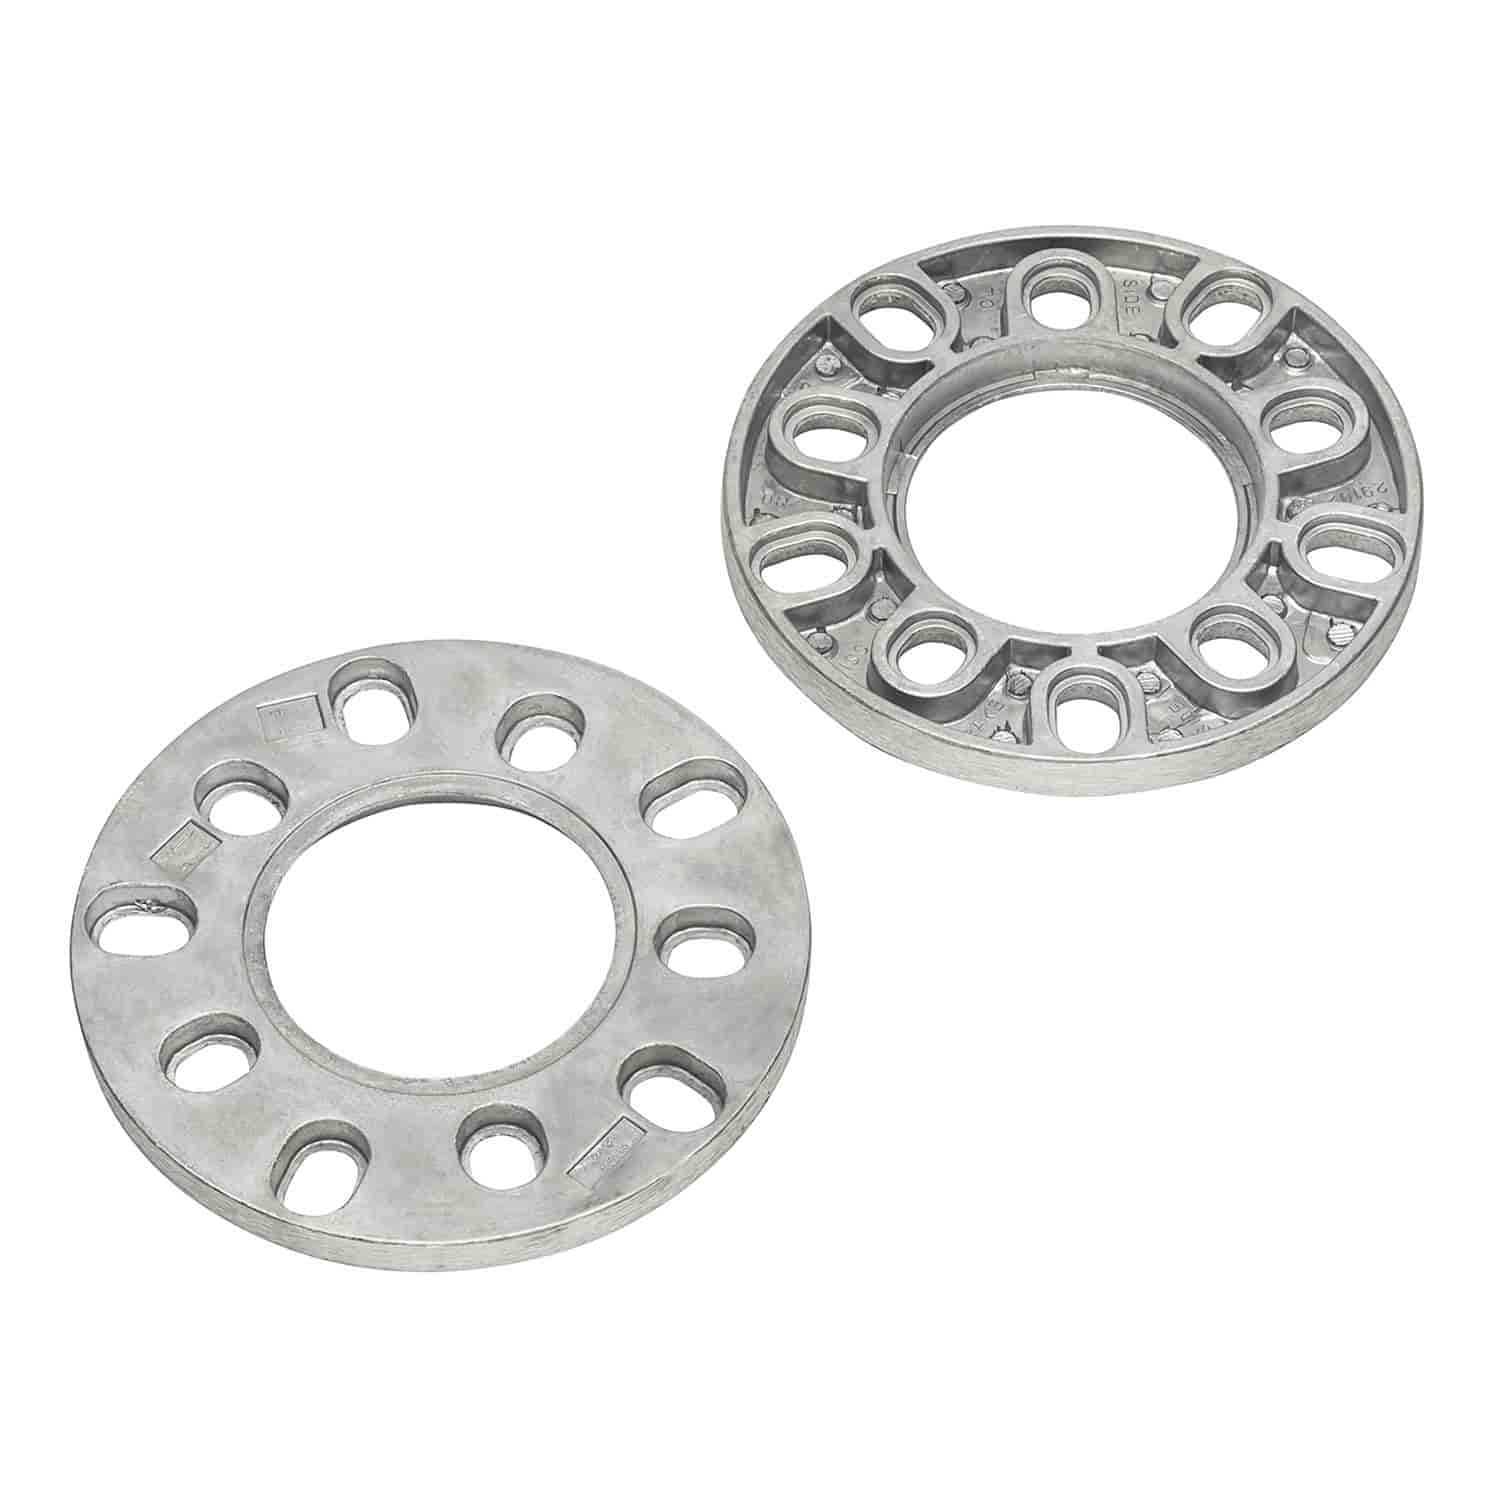 Spacers 1/2" Spacer, 5 x 4-1/2" , 4-3/4" , 5" , 5-1/2"